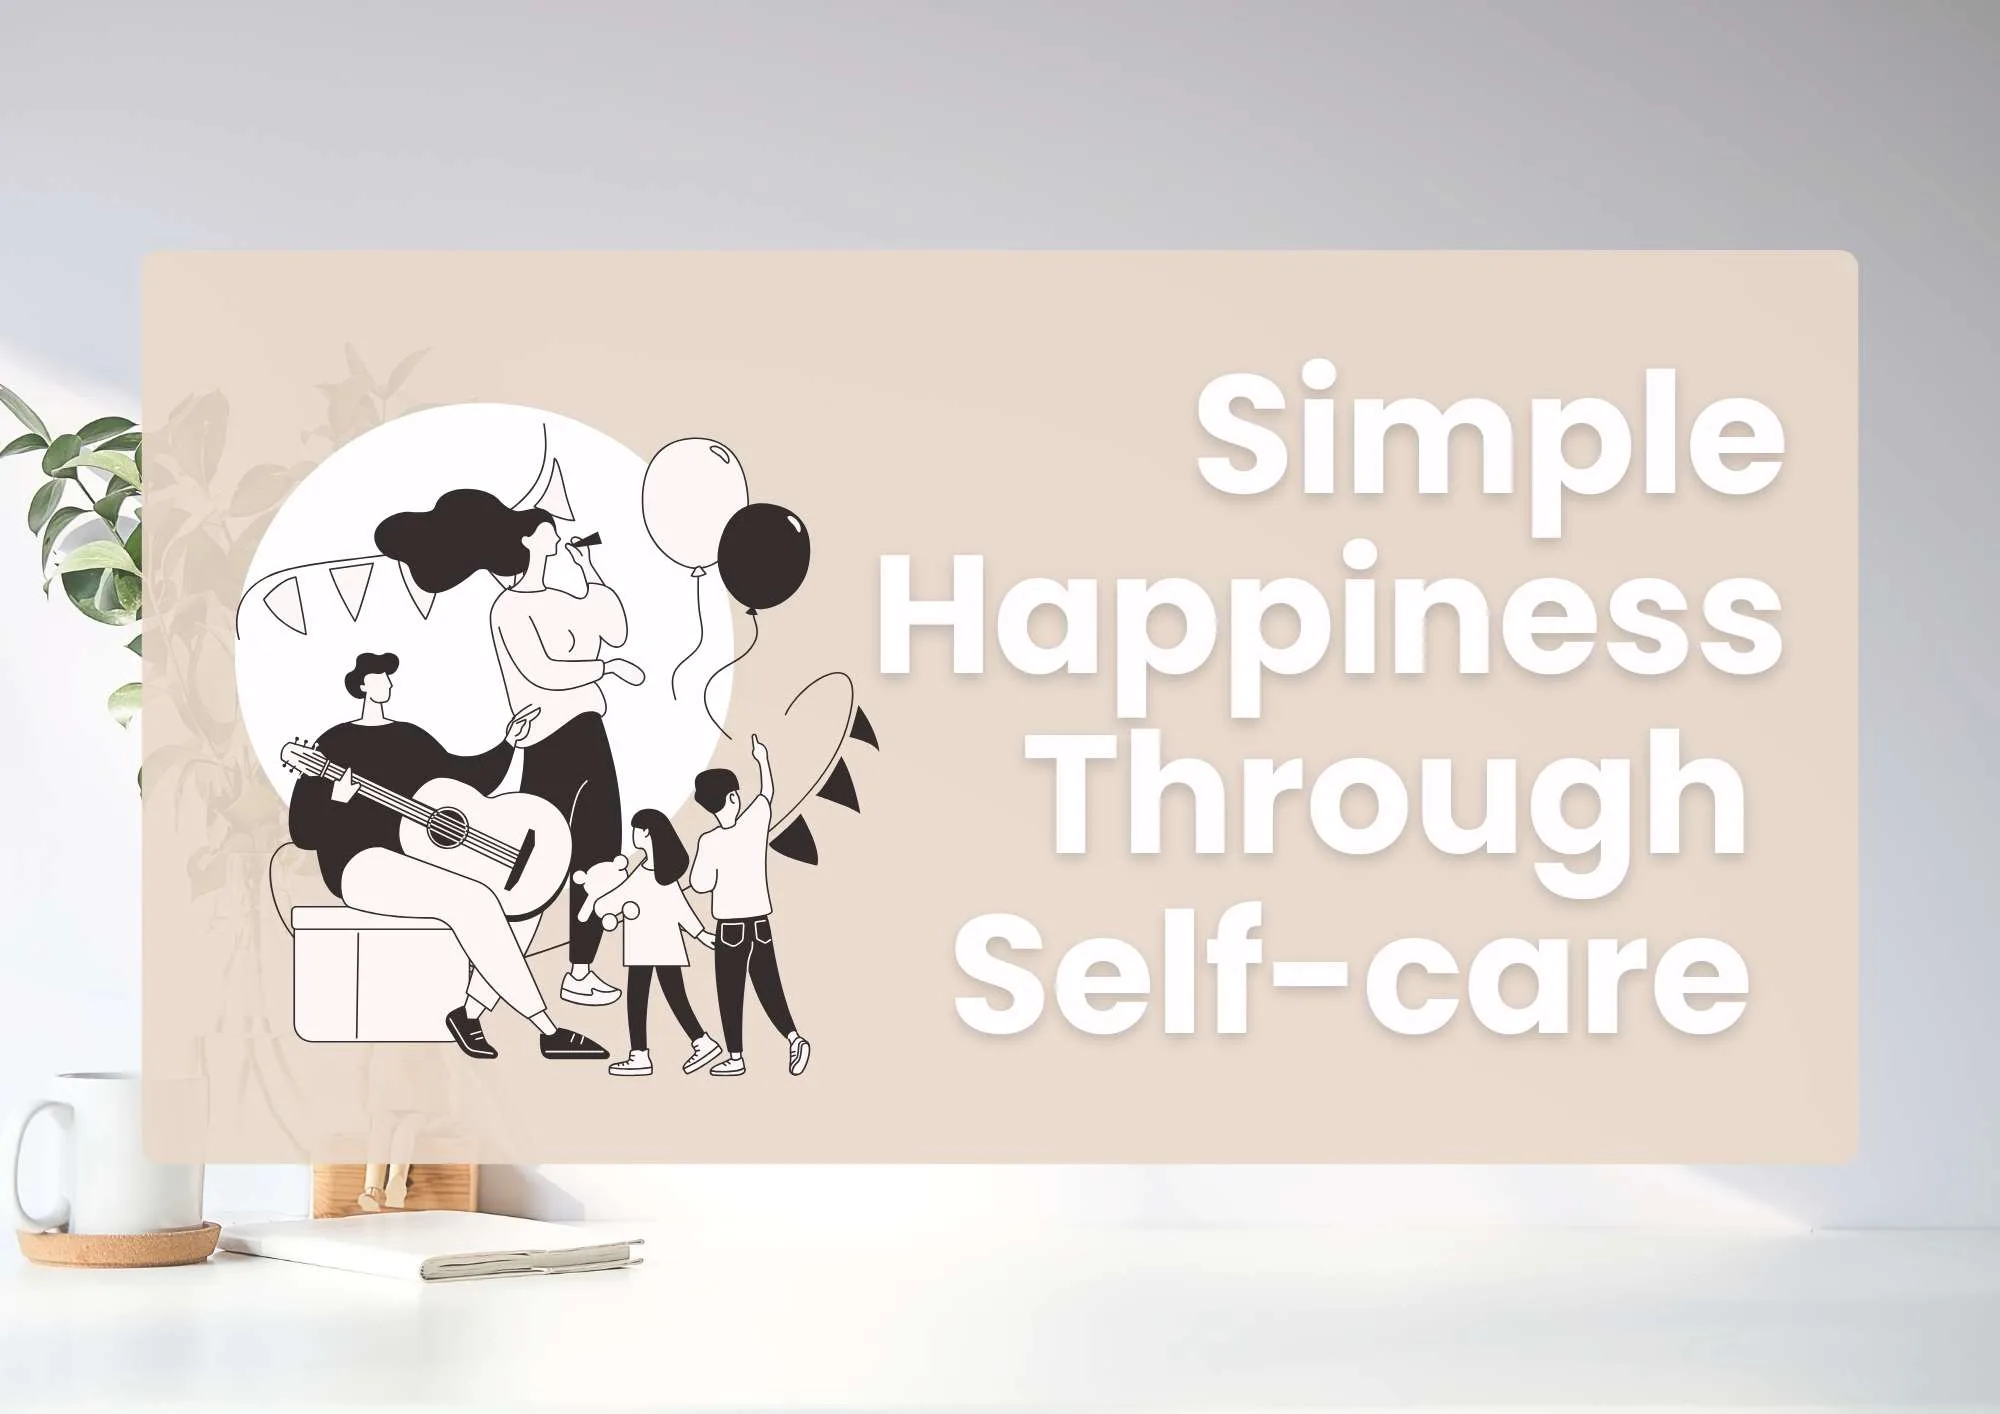 Simple Happiness Through Self-care Will Make You Better